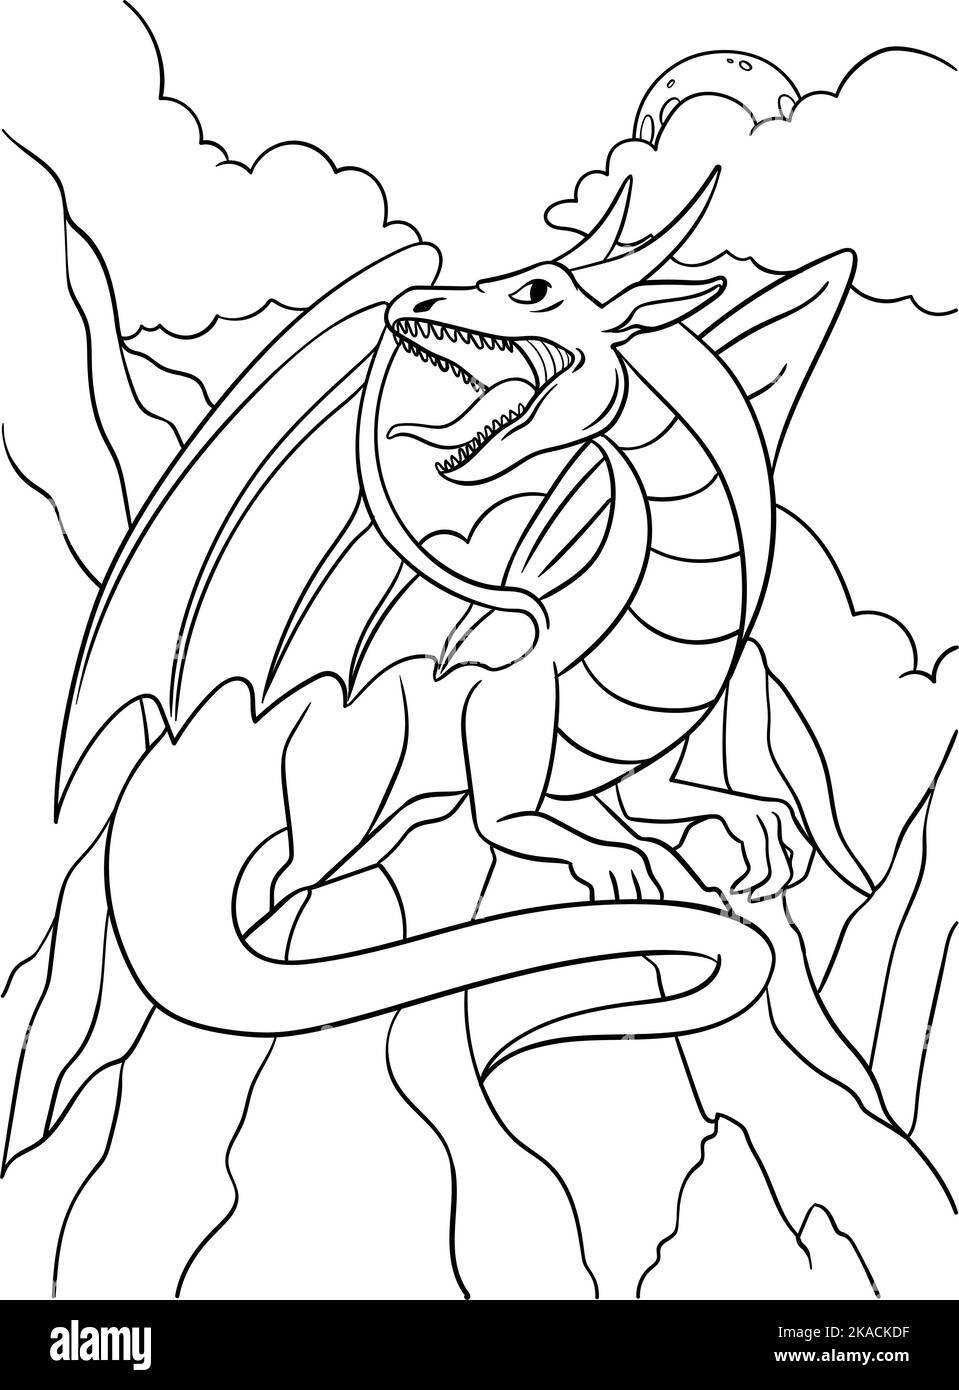 Dragon Animal Coloring Page for Kids Stock Vector